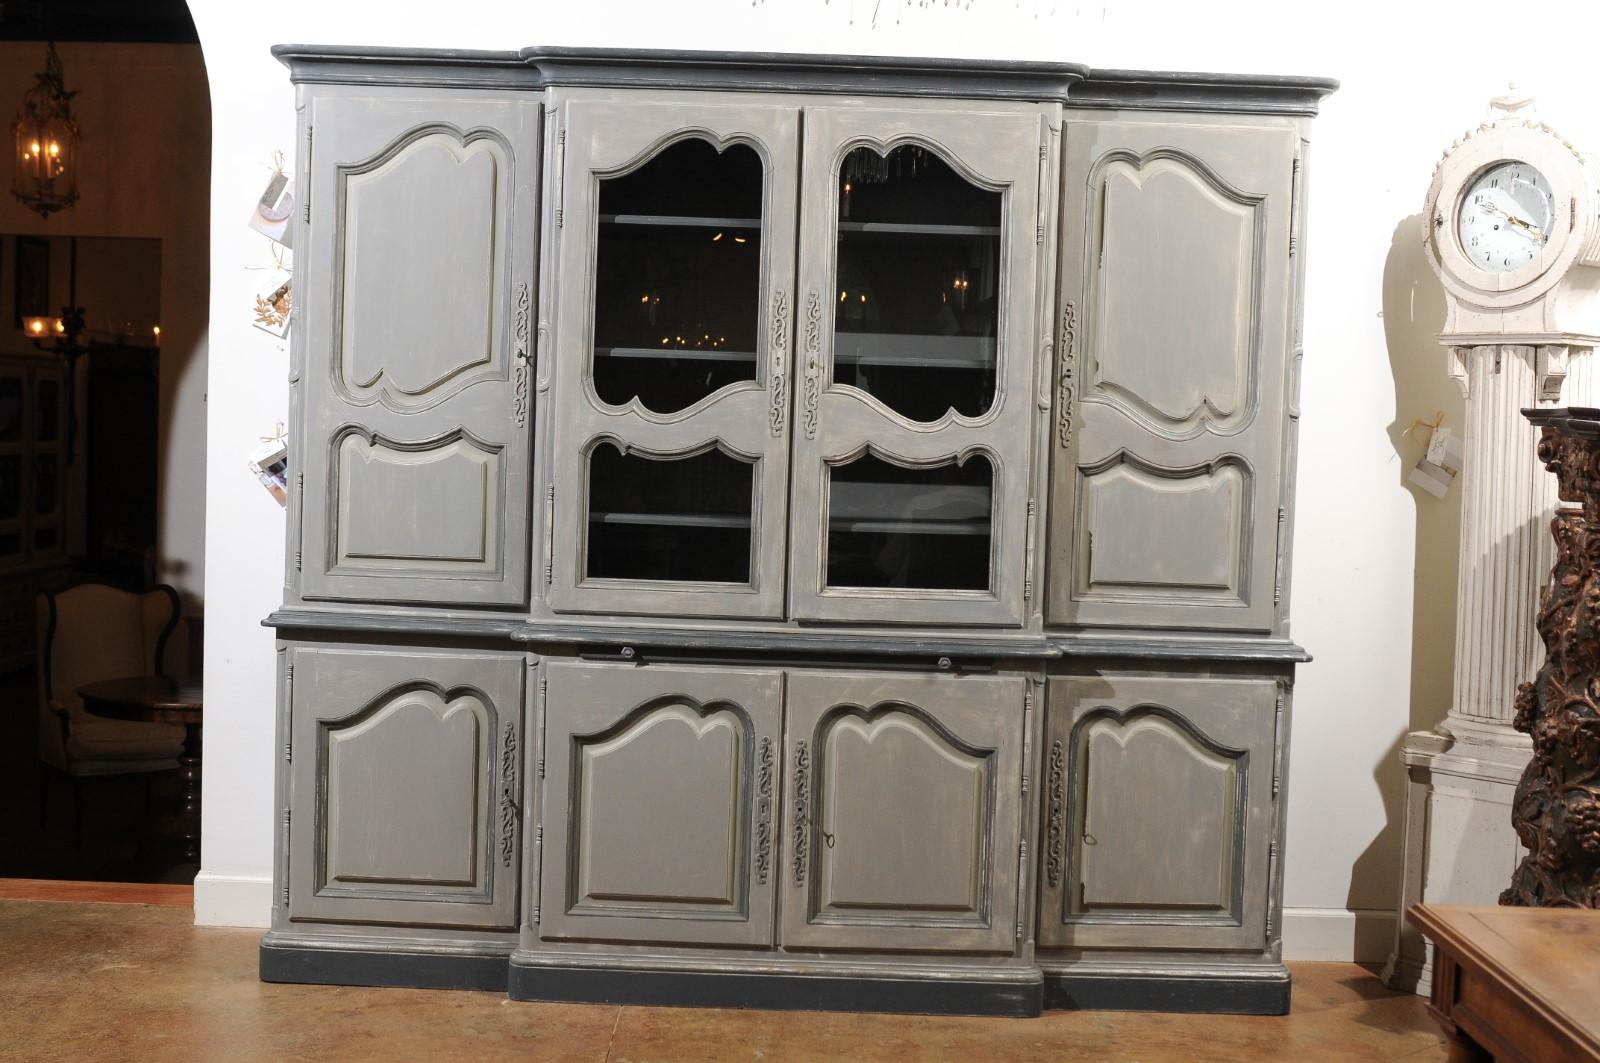 A large French vintage Louis XV style painted two-part bookcase with glass doors, custom-made for a client in 1978. This French bibliothèque features a dark grey painted cornice, sitting above a breakfront façade. The central section showcases two